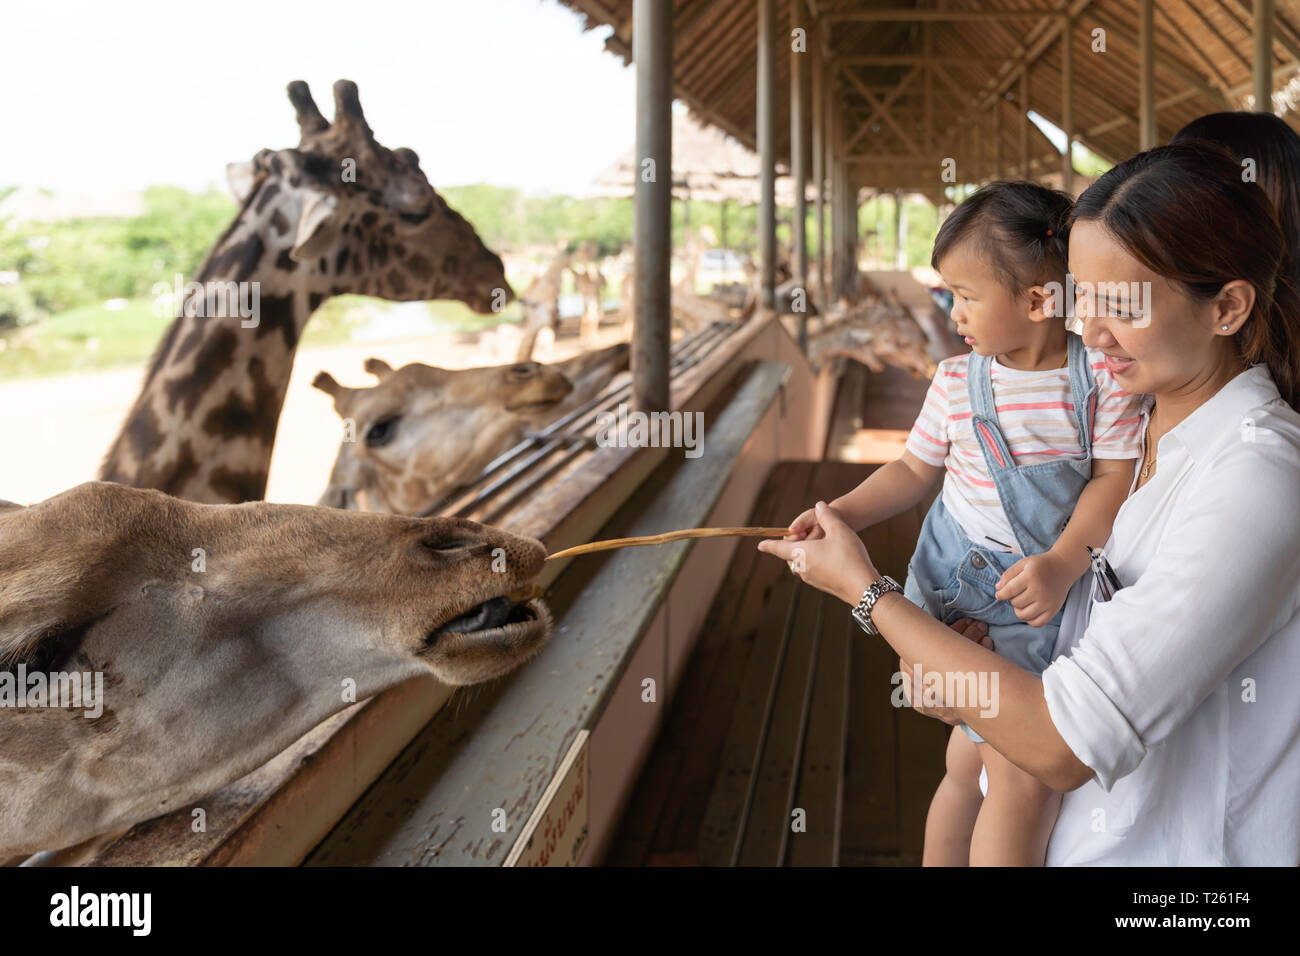 Asian cute baby girl feeding on your hand for big giraffe in animal farm background, summer vacation holiday travel, family life style concept. Stock Photo